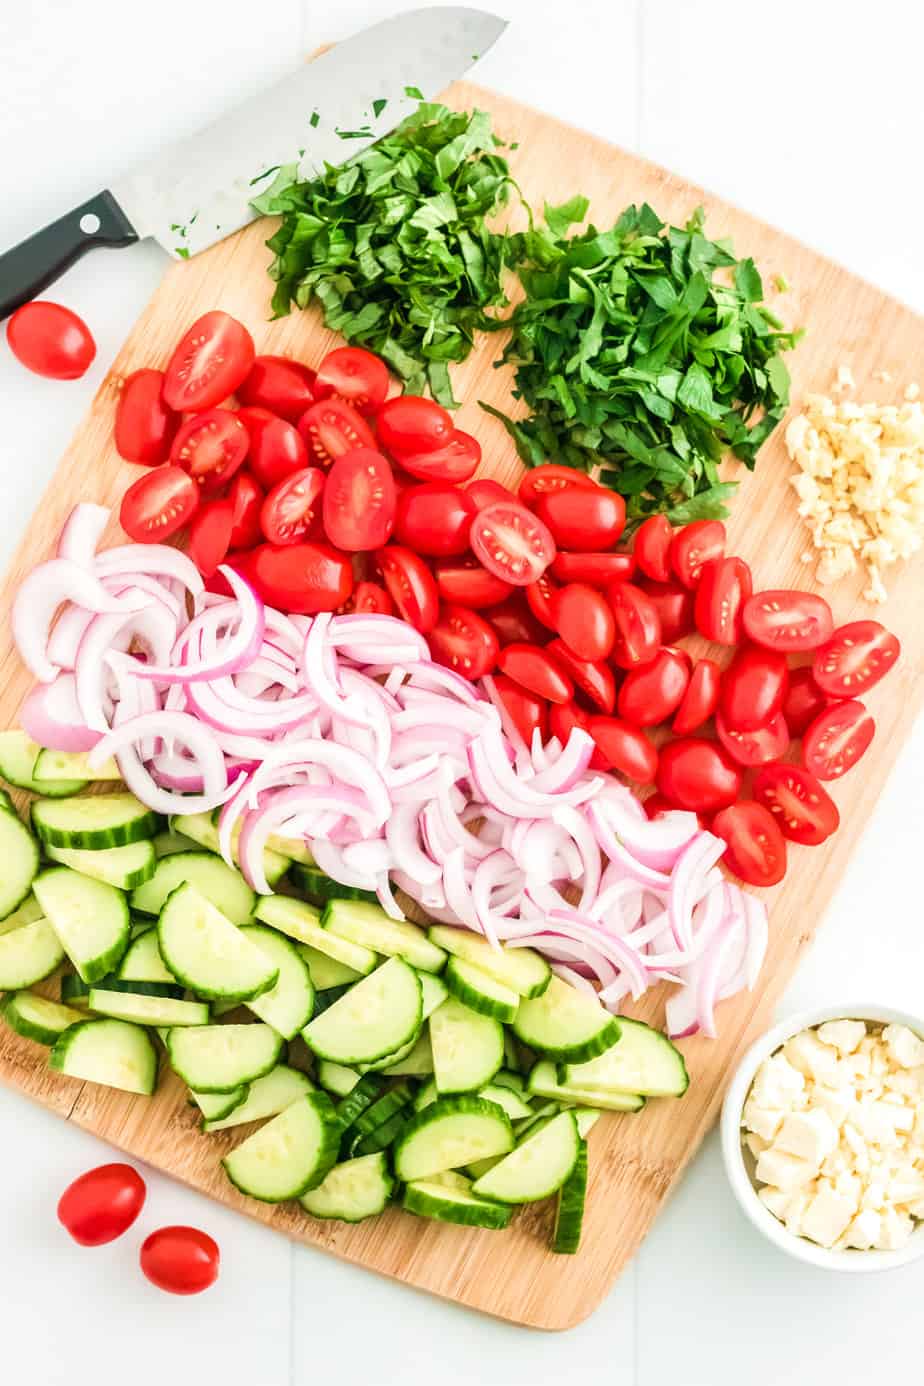 Cucumbers, red onions, tomatoes and fresh herbs chopped on a cutting board with a knife next to the cutting board from overhead.